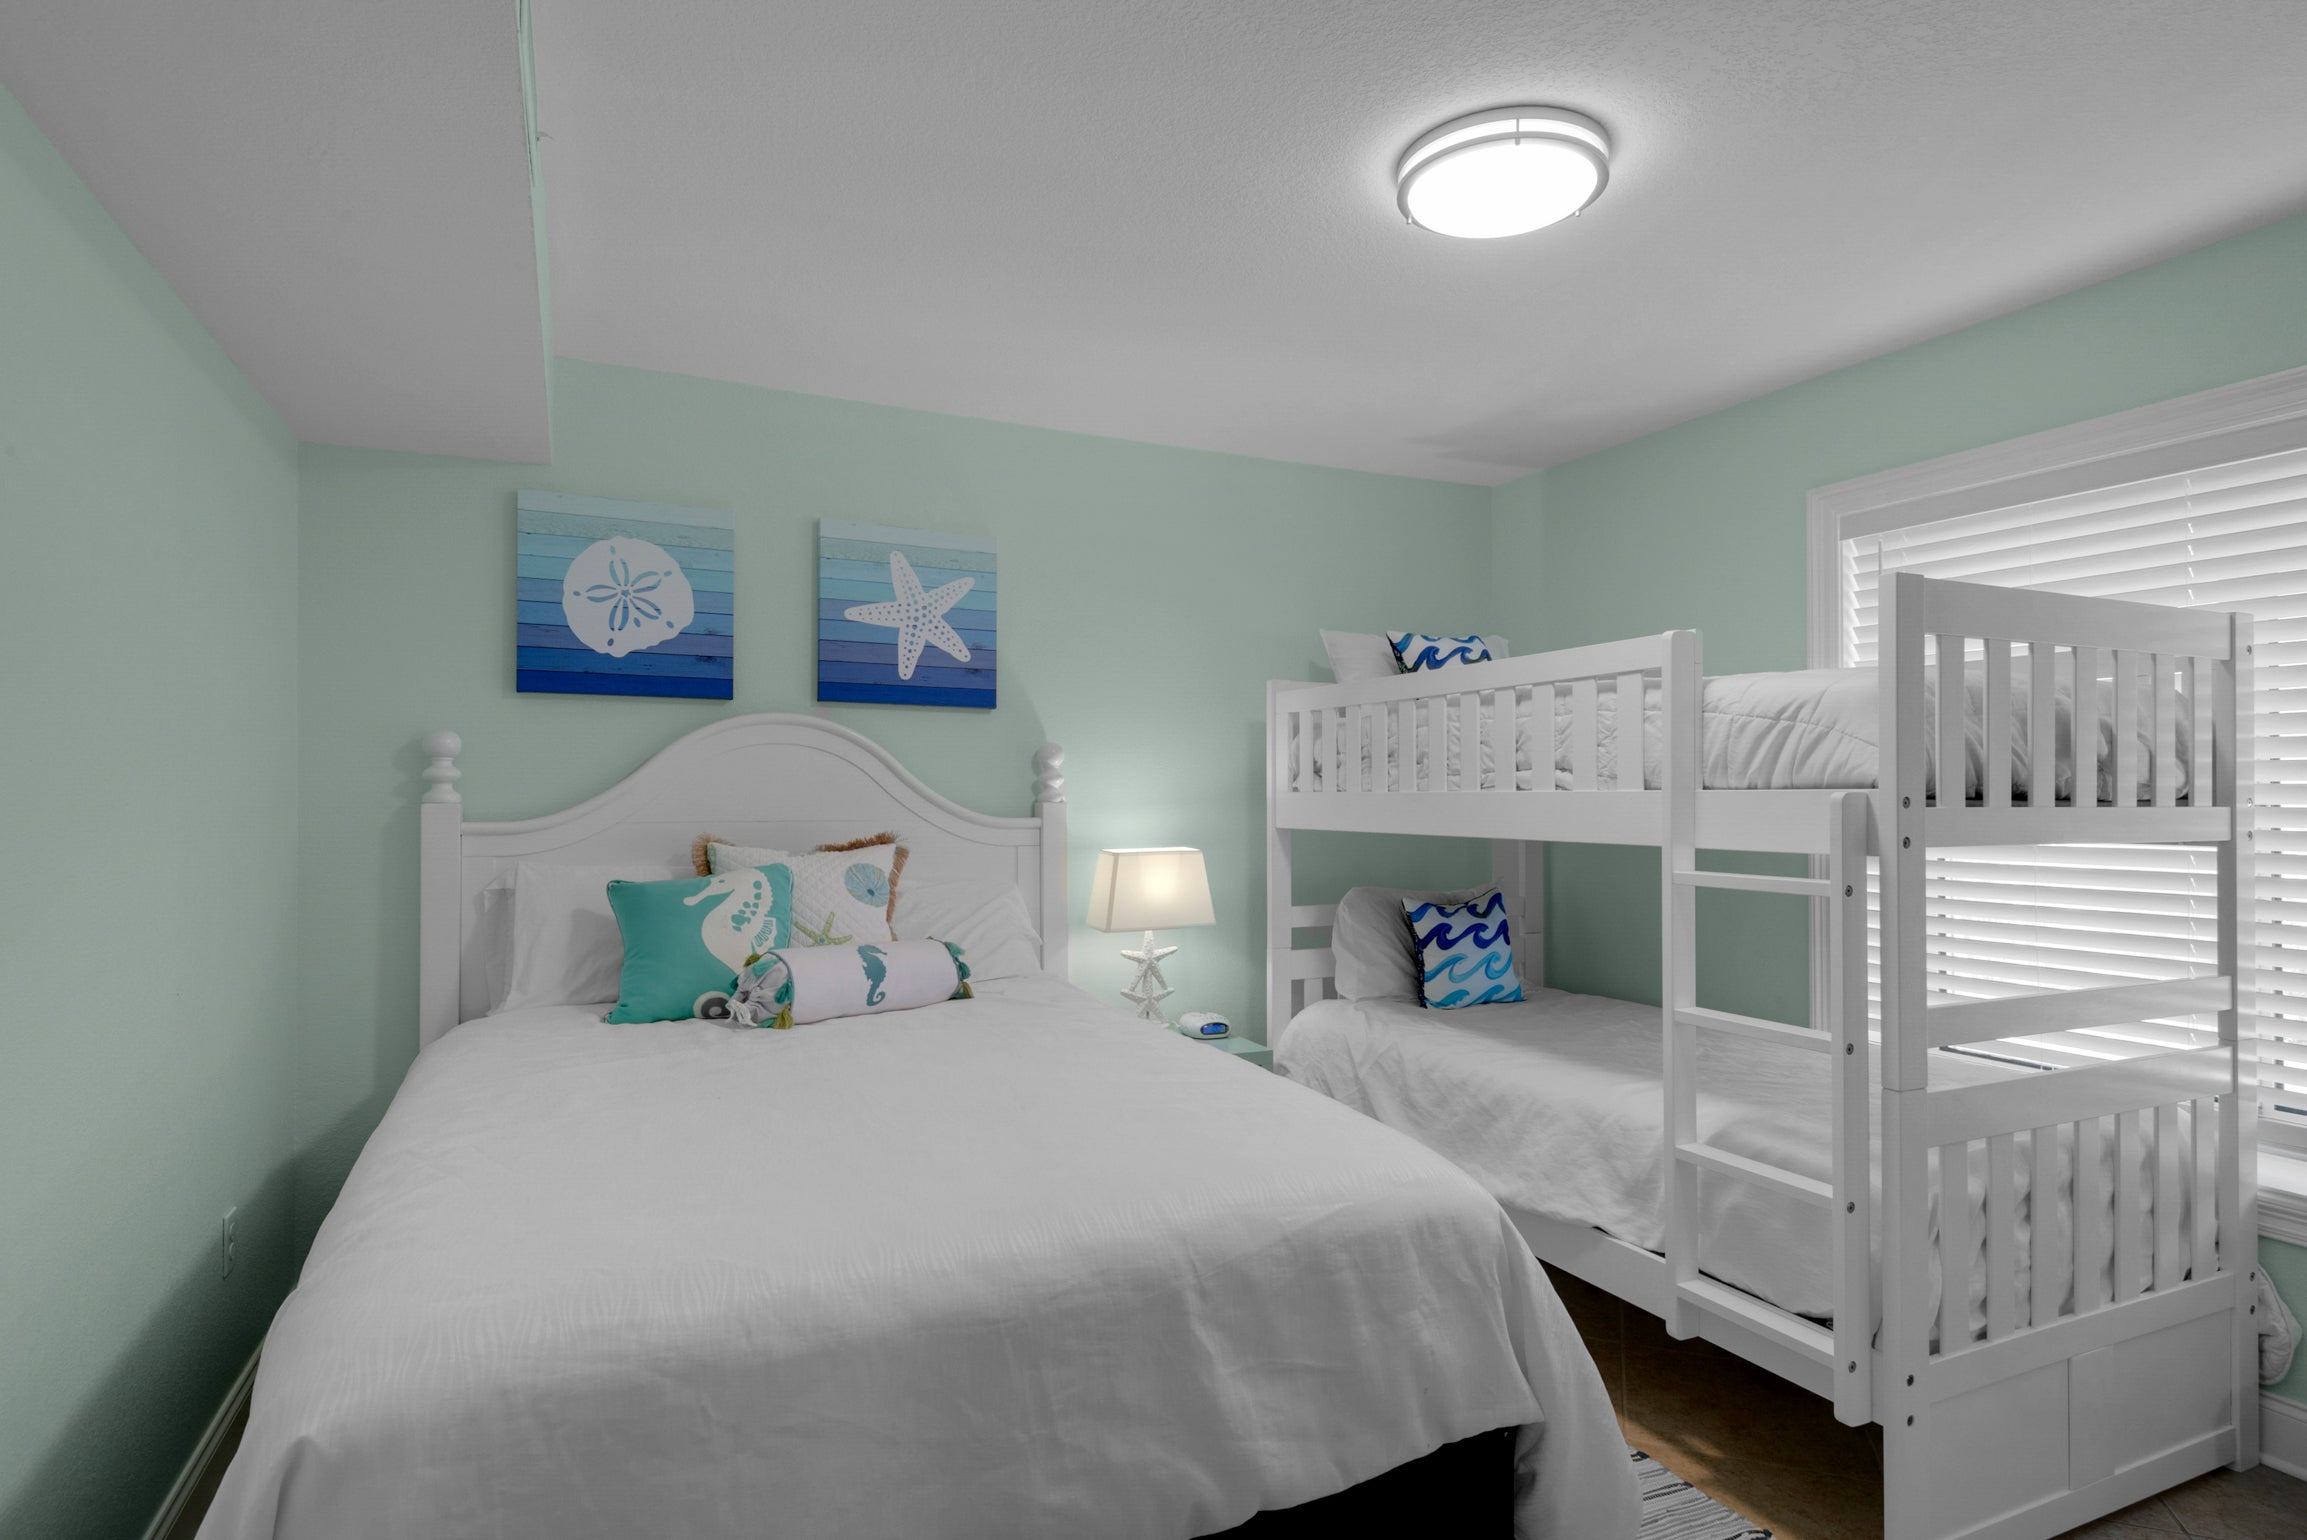 Guest bedroom with bed and bunk beds